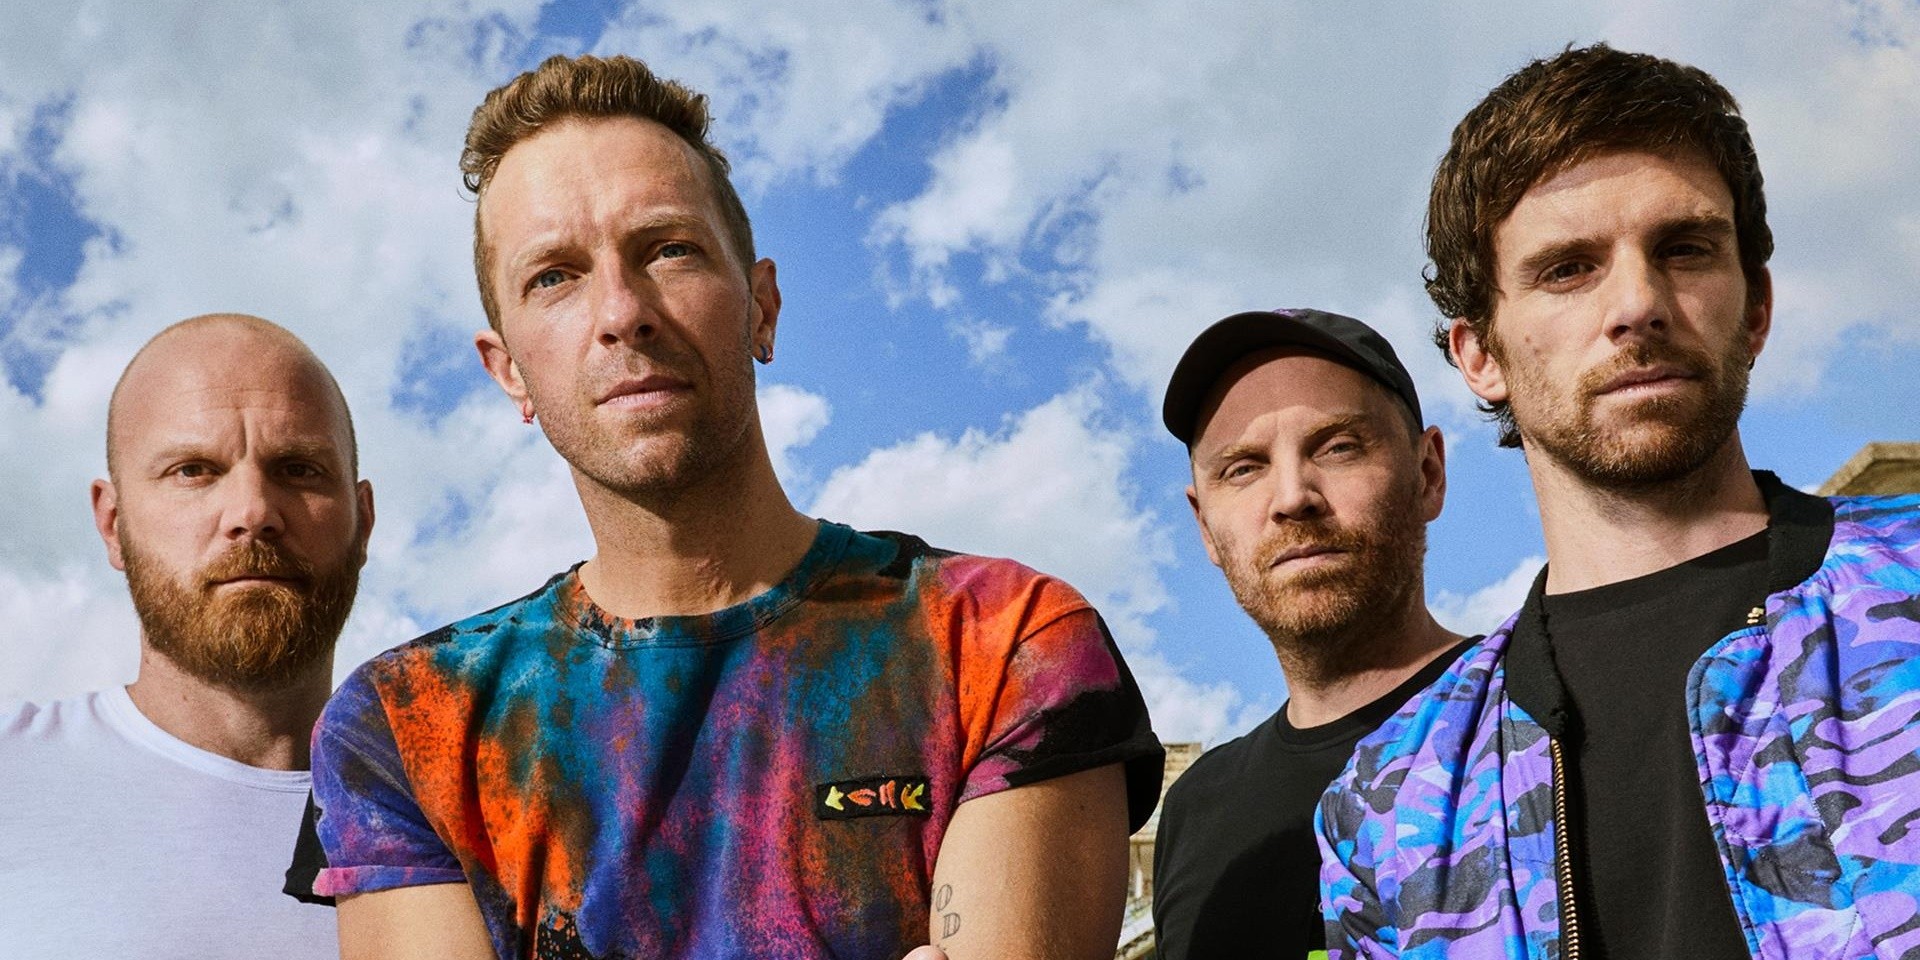 Coldplay sell over 200,000 tickets in one day, add two new Singapore concert dates to 'Music of the Spheres' Asia tour